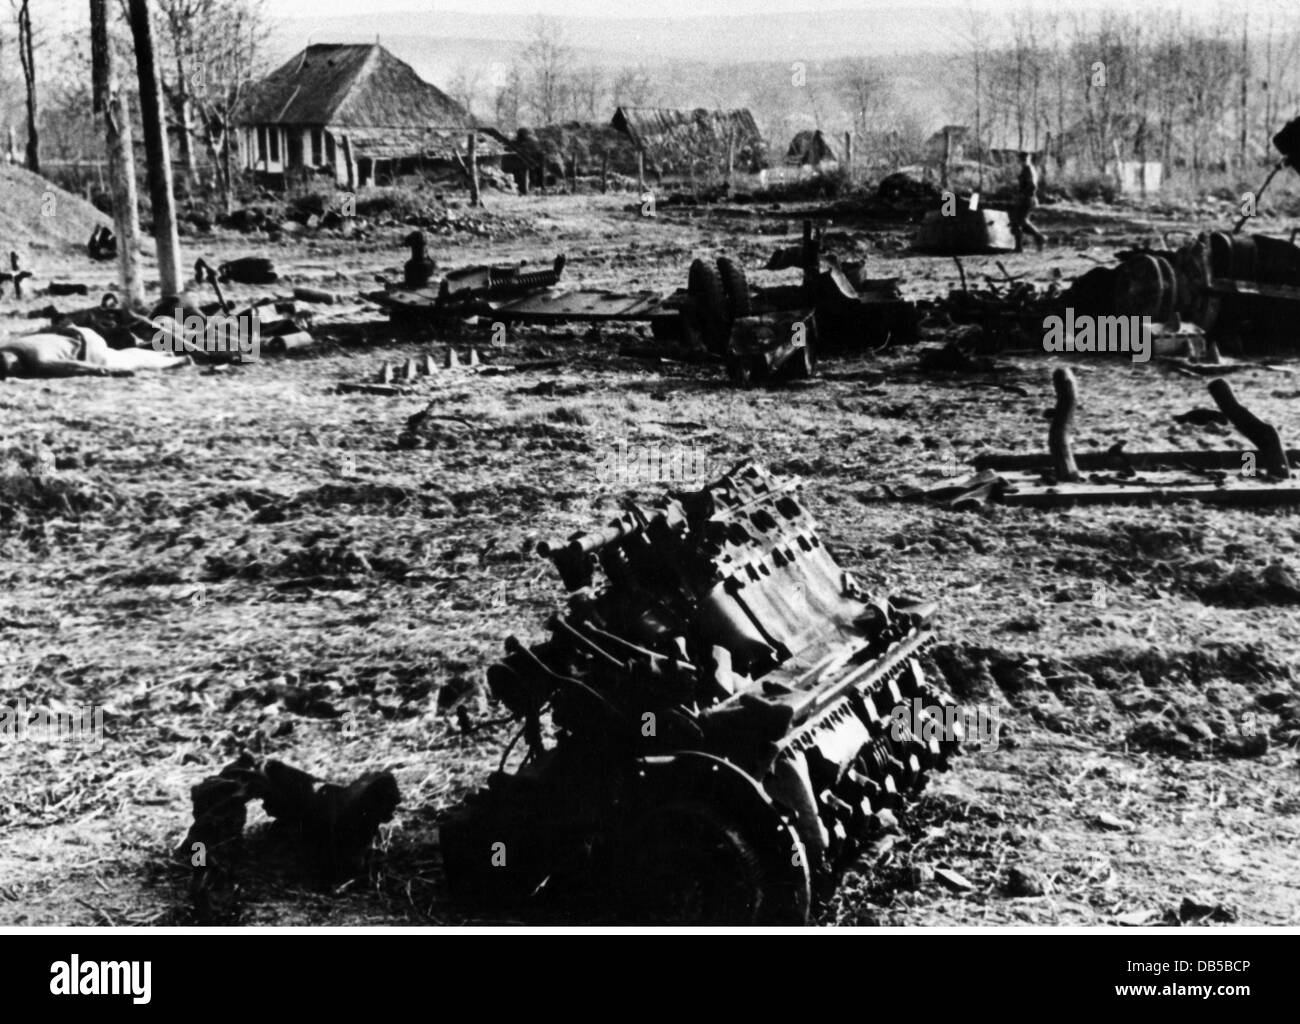 events, Second World War / WWII, Russia 1944 / 1945, remains of a blown up Soviet T-34/76 tank in a village at the Dniester, spring 1944, wreck, wreckage, parts, engine, 20th century, historic, historical, Dnestr, Eastern Front, destruction, T34, T 34, tanks, Soviet Union, USSR, exploded, destroyed, knocked out, people, 1940s, Additional-Rights-Clearences-Not Available Stock Photo